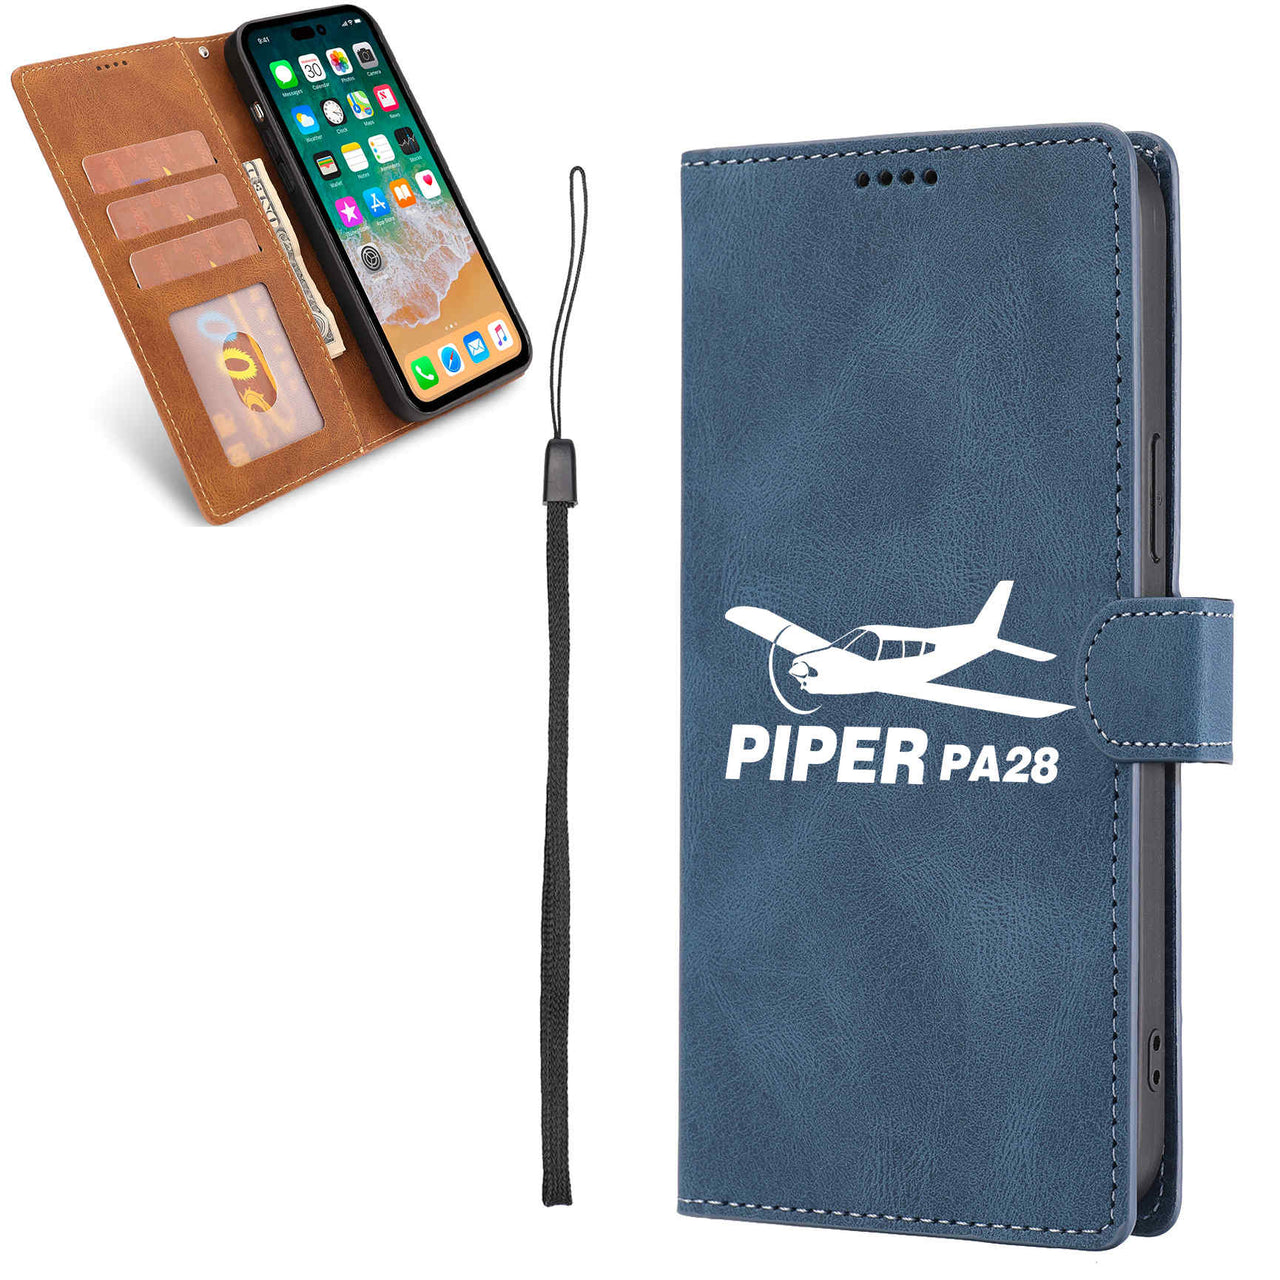 The Piper PA28 Leather Samsung A Cases